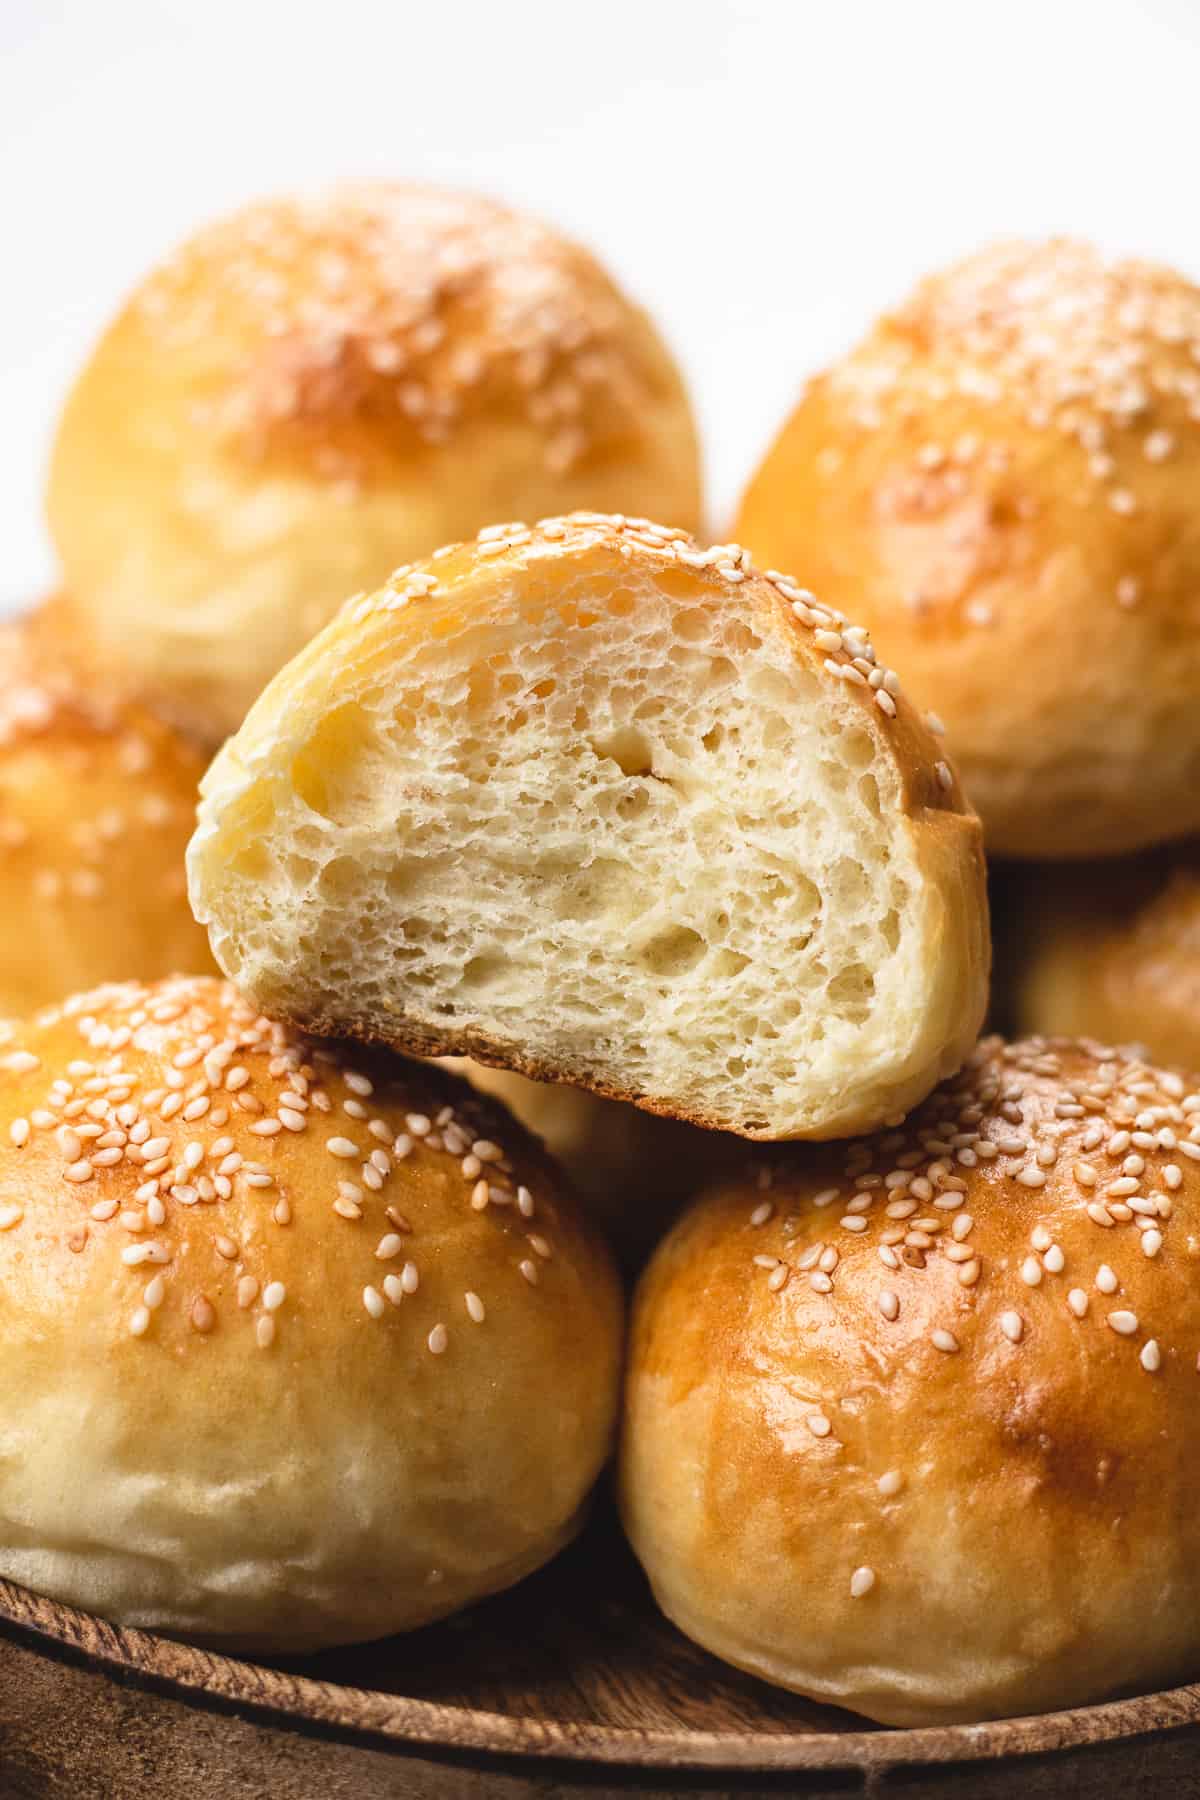 A close up photo of potato rolls topped with sesame seeds.